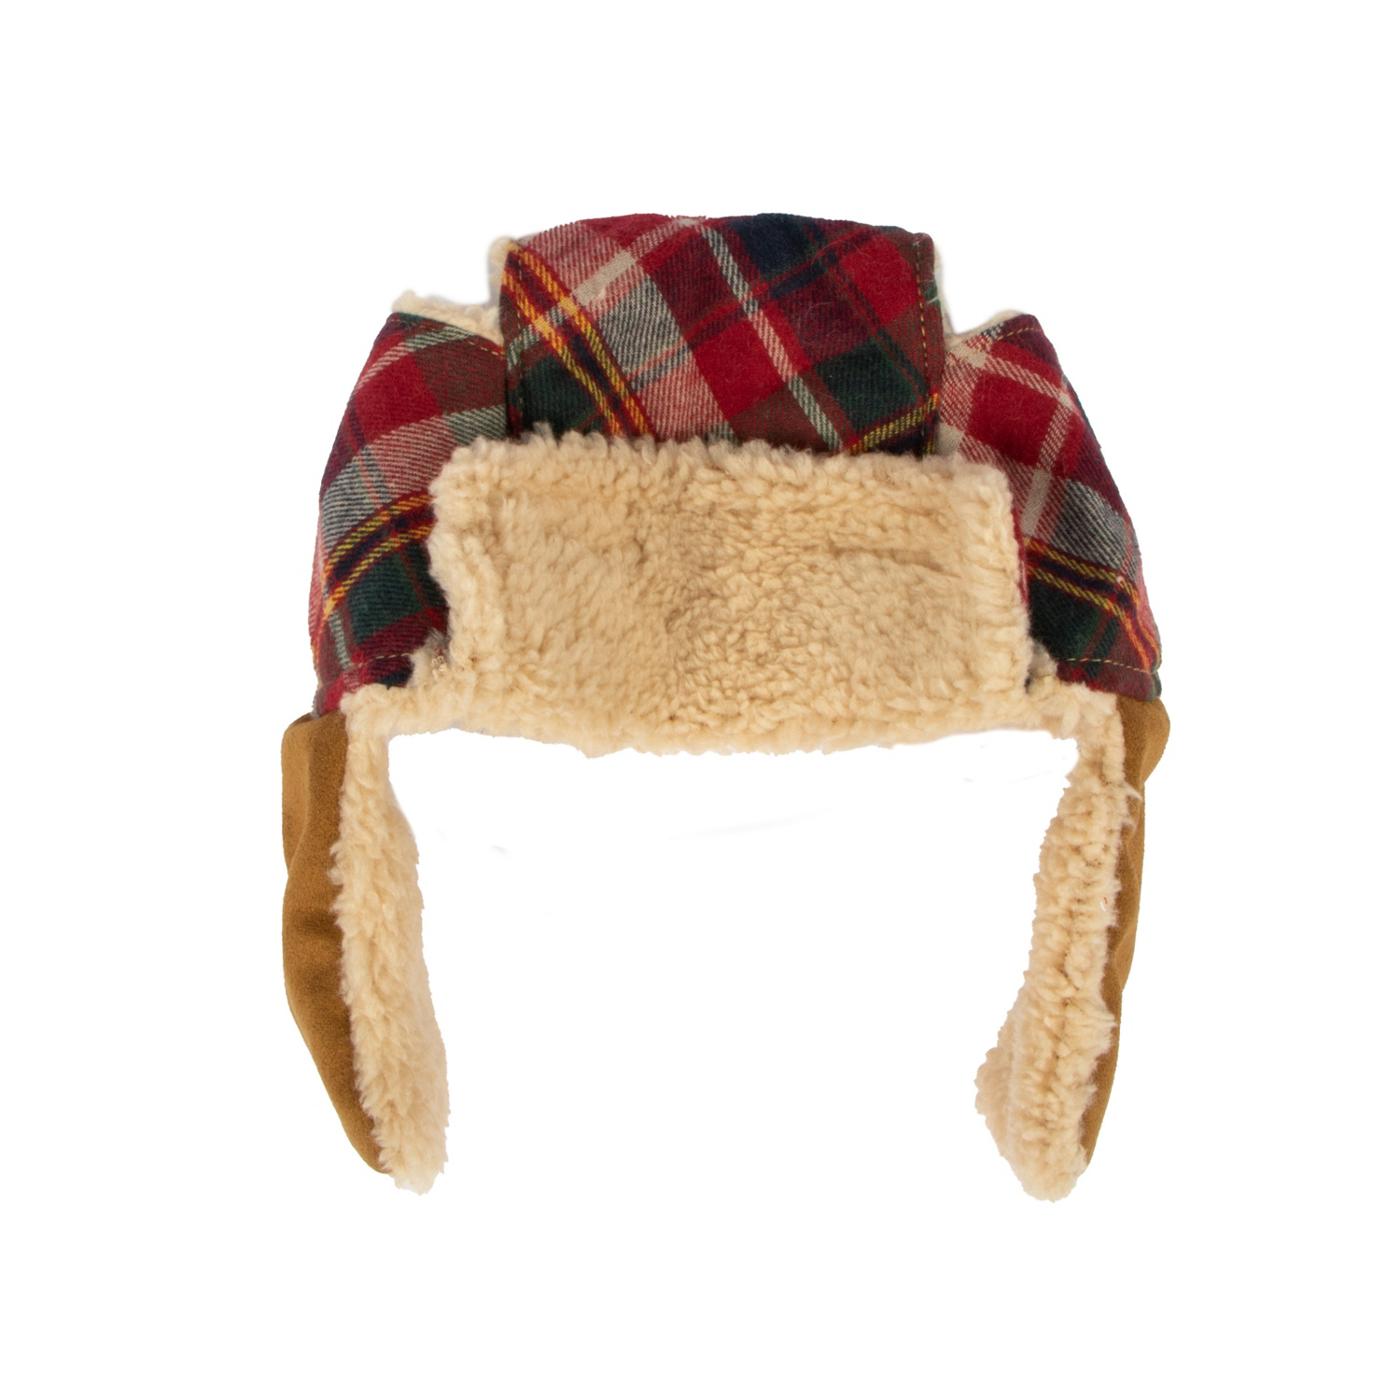 Simply Dog Red Plaid Trapper Hat XS/S; image 1 of 2